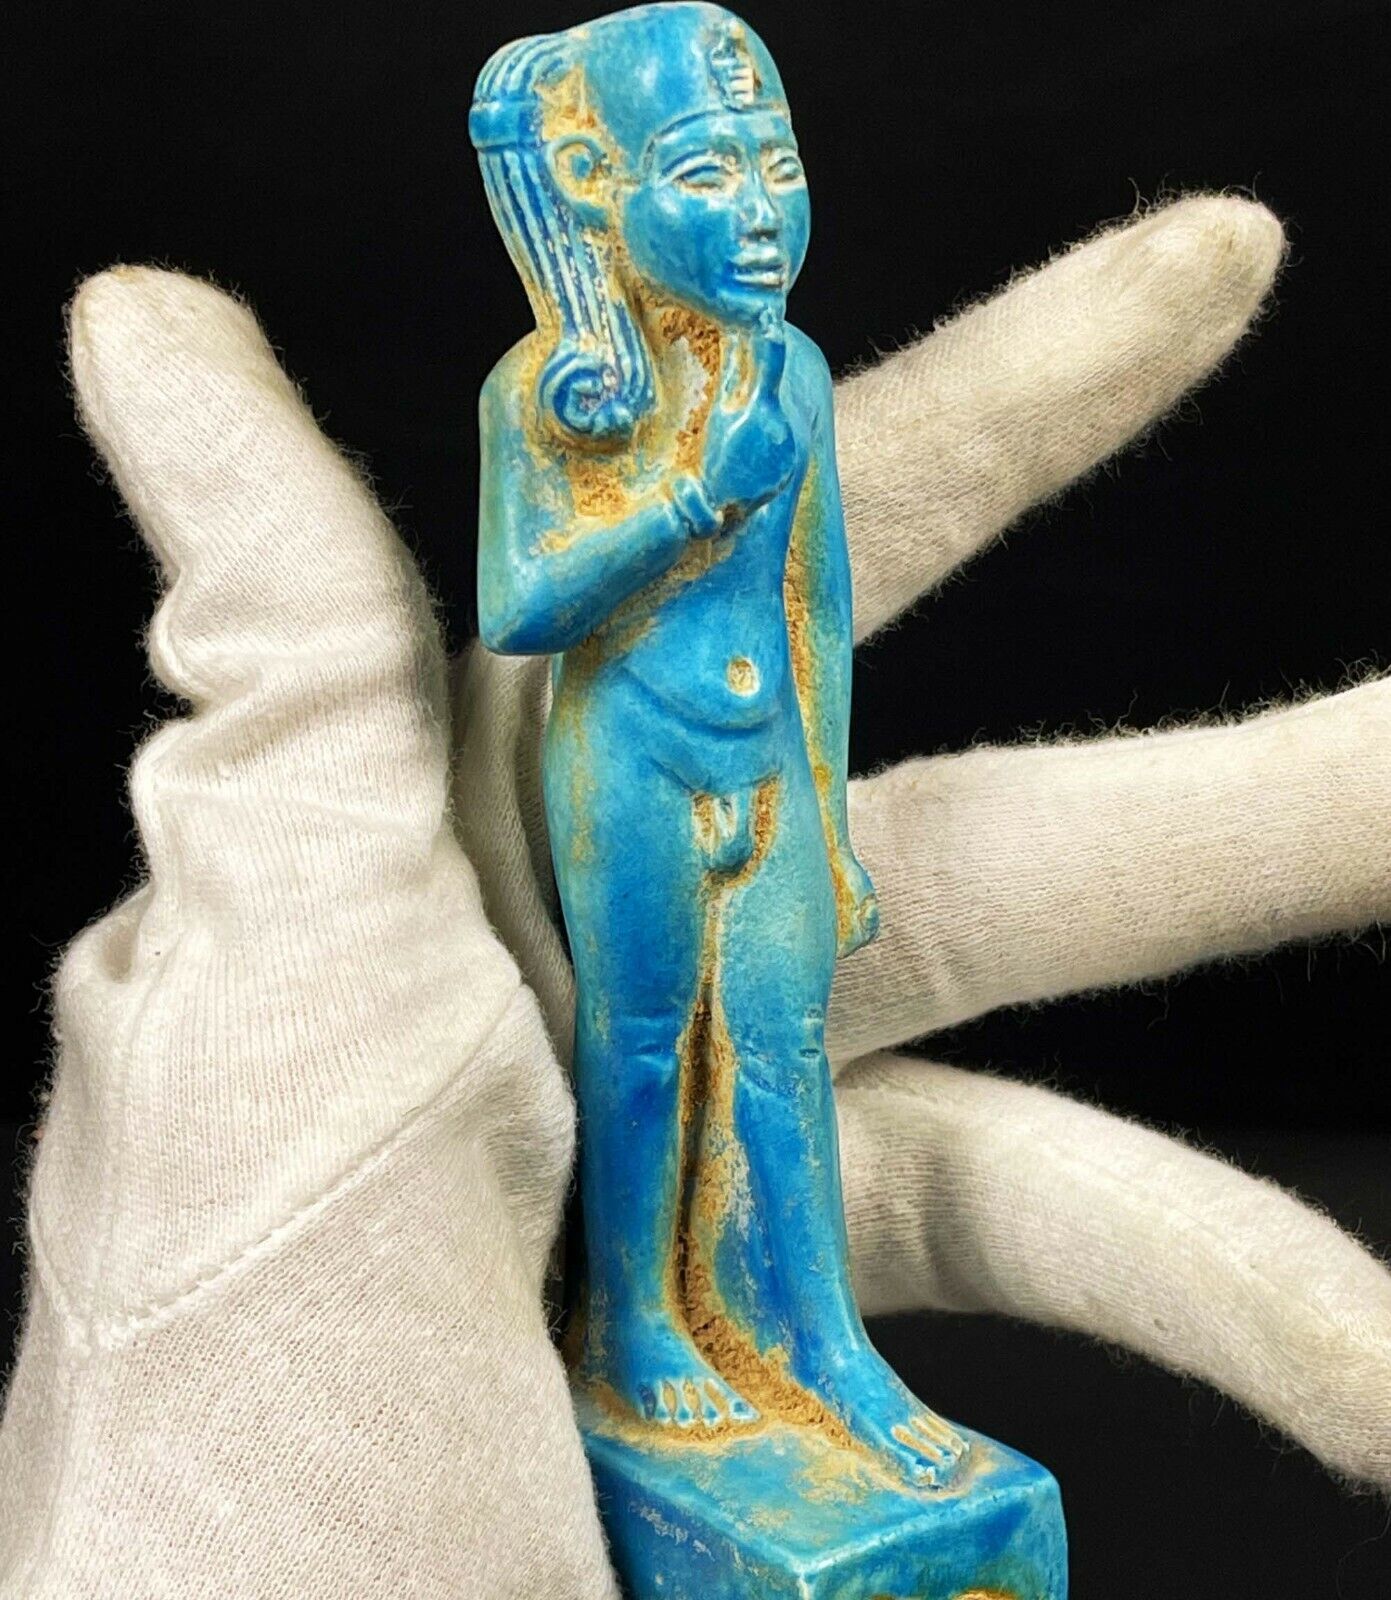 One Of A Kind God of Life and Sky -The Egyptian God HORUS As a Baby -